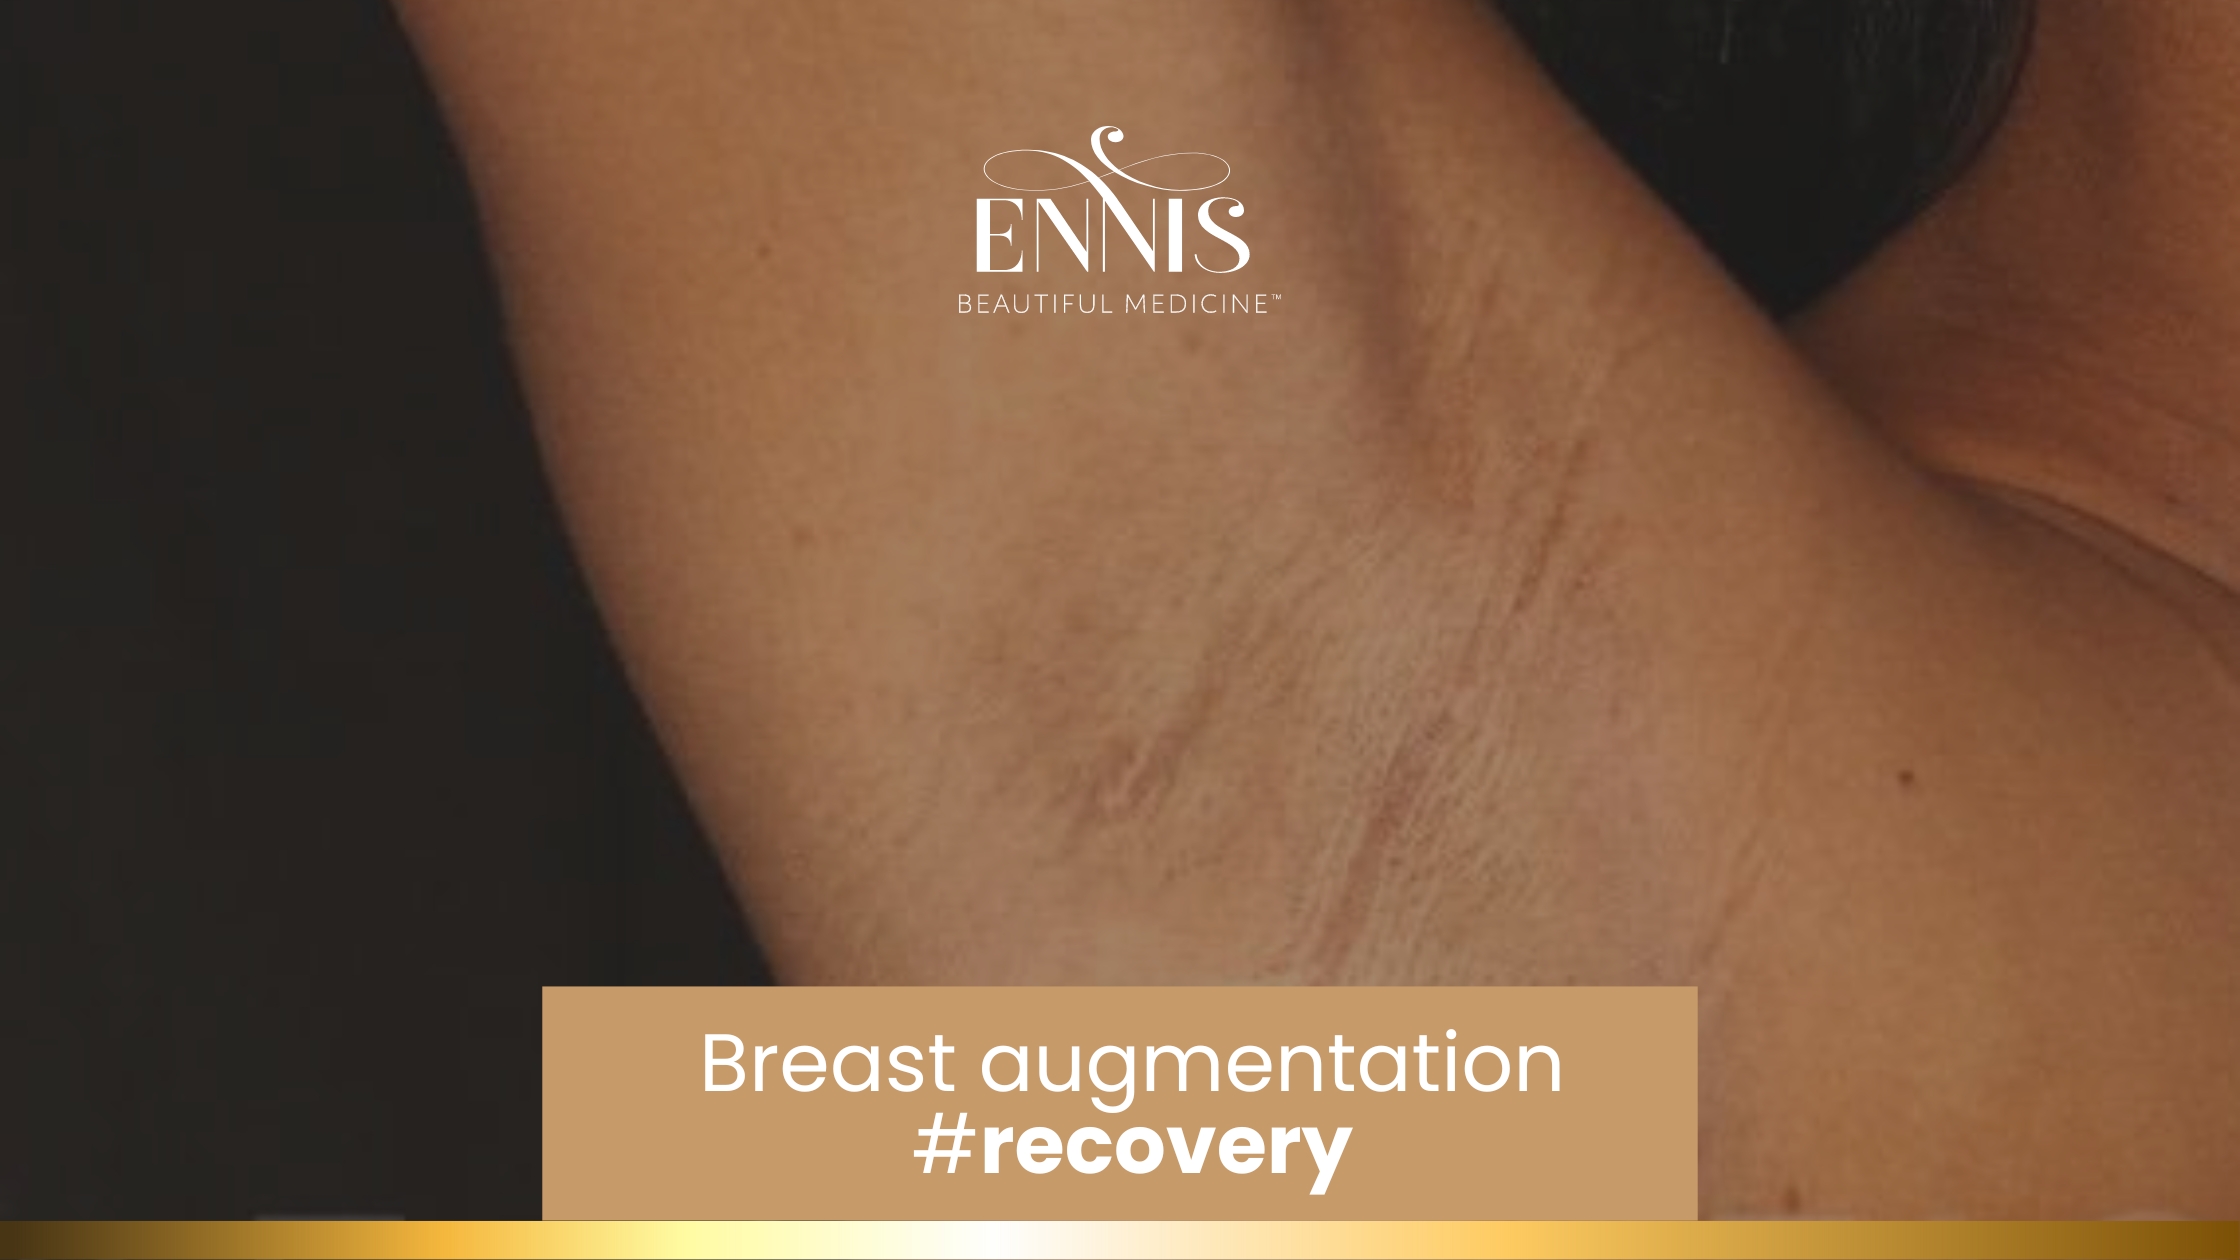 Top 7 Tips to Ease Your Breast Augmentation Recovery